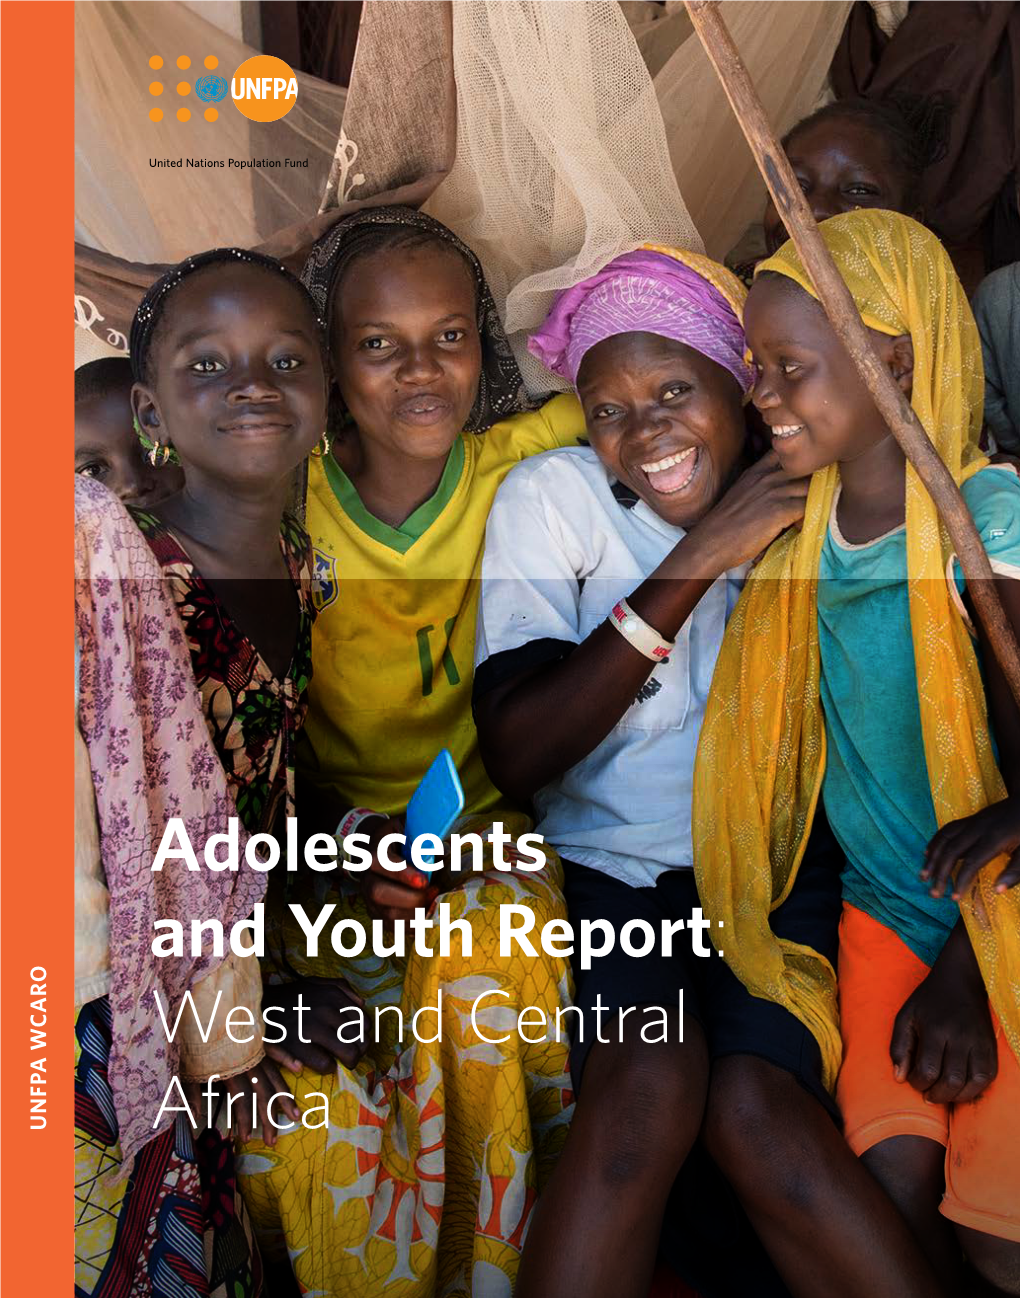 Adolescents and Youth Report: West and Central Africa